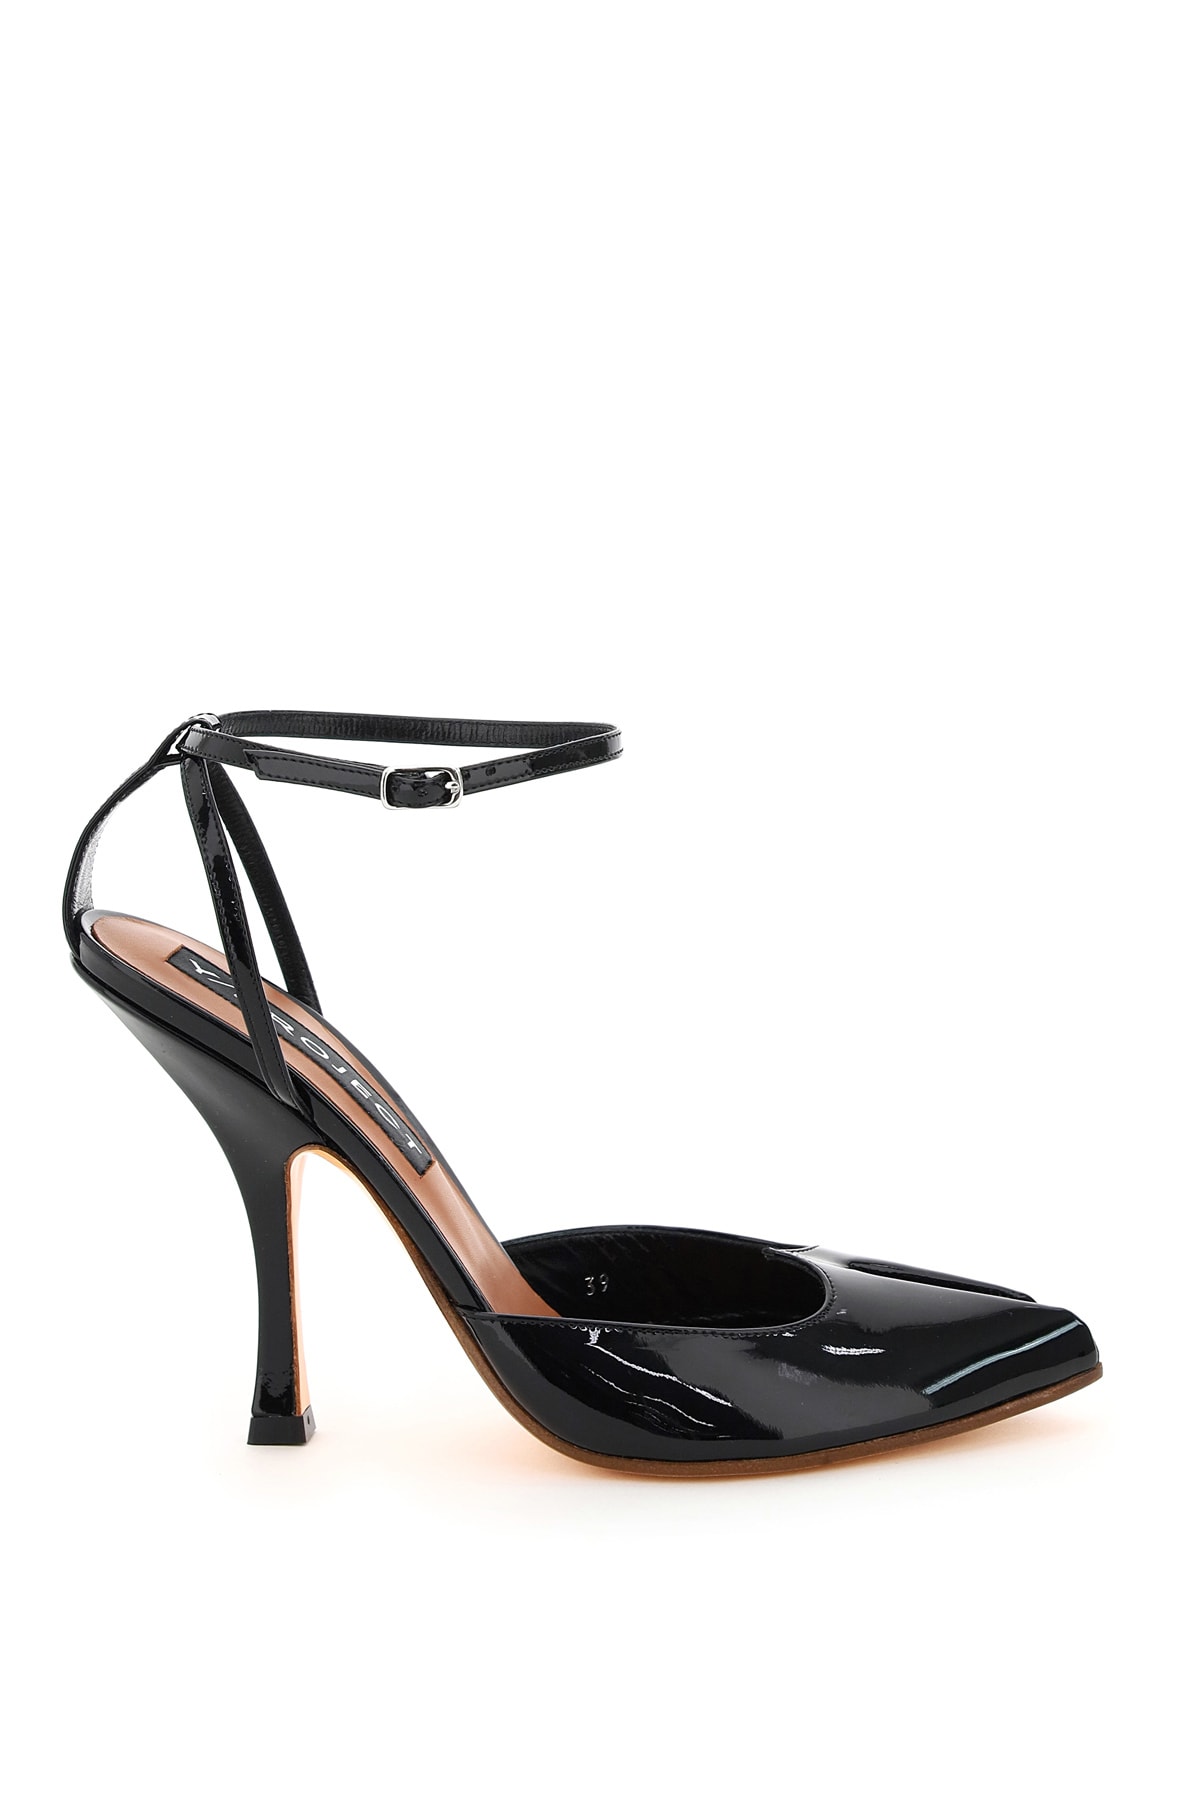 Y/Project Heart Lobster Toe Patent Slingback Pumps